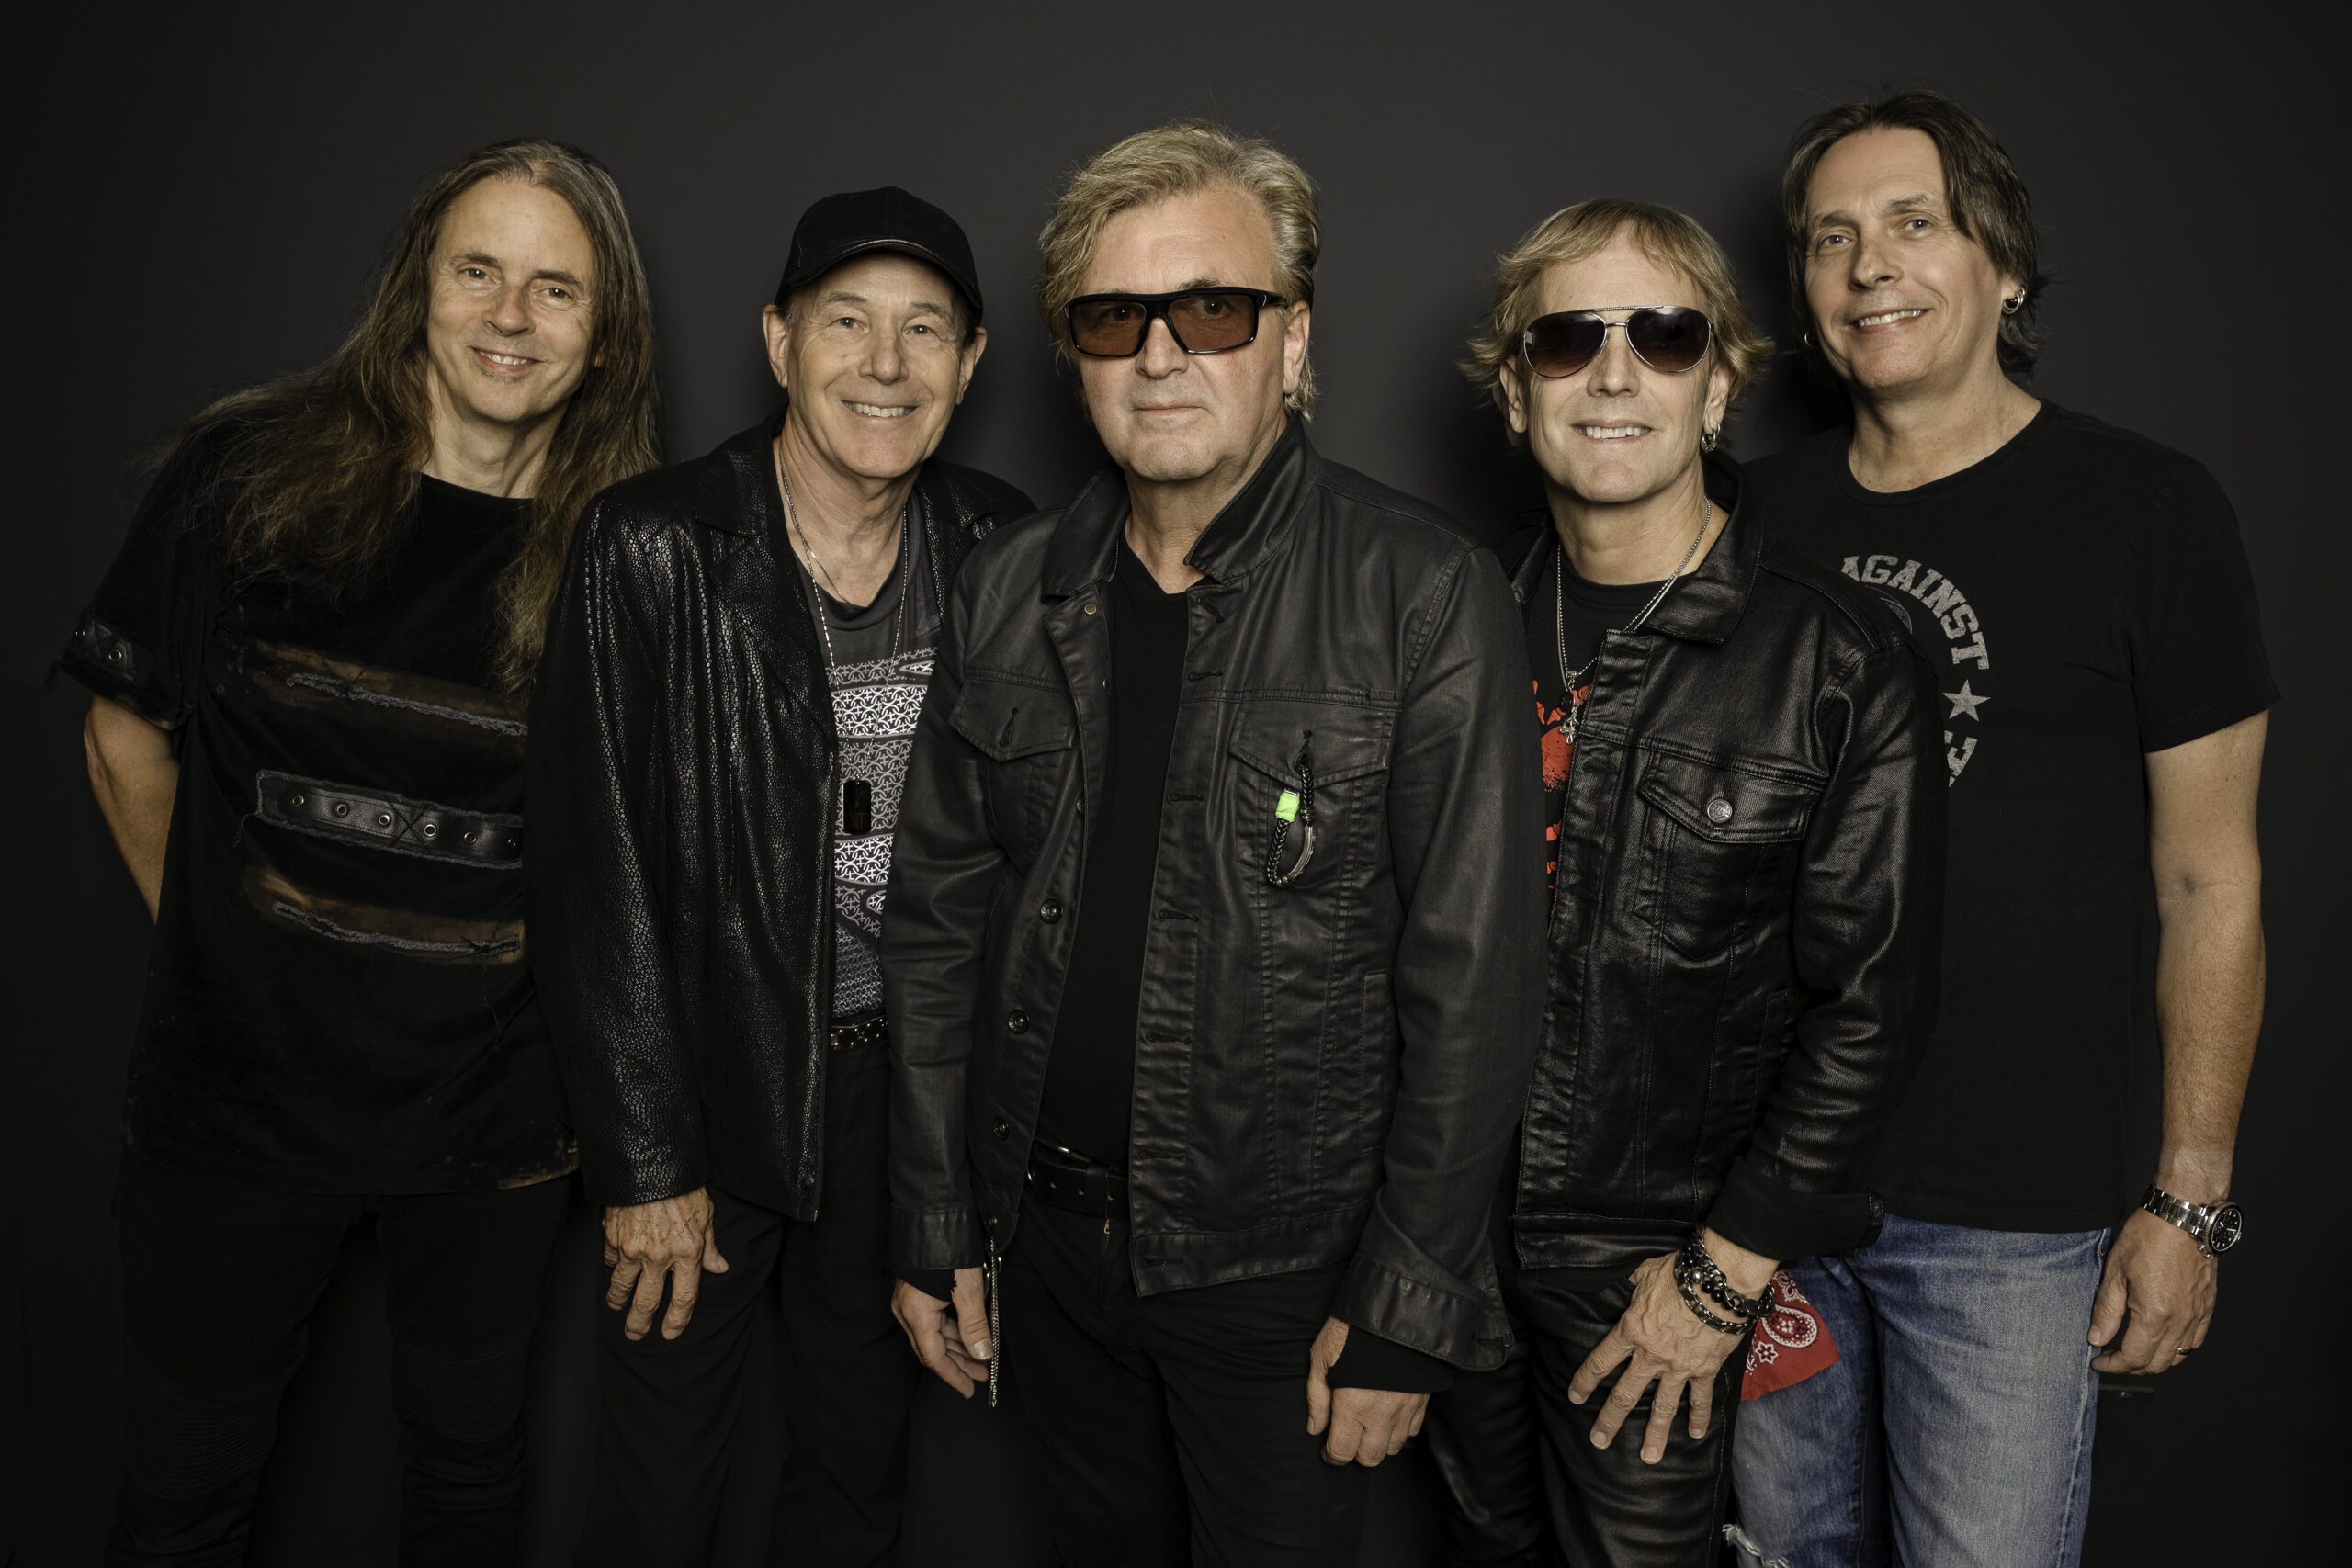 Honeymoon Suite, Canadian rock band, who will perform at Penticton Peach Festival.